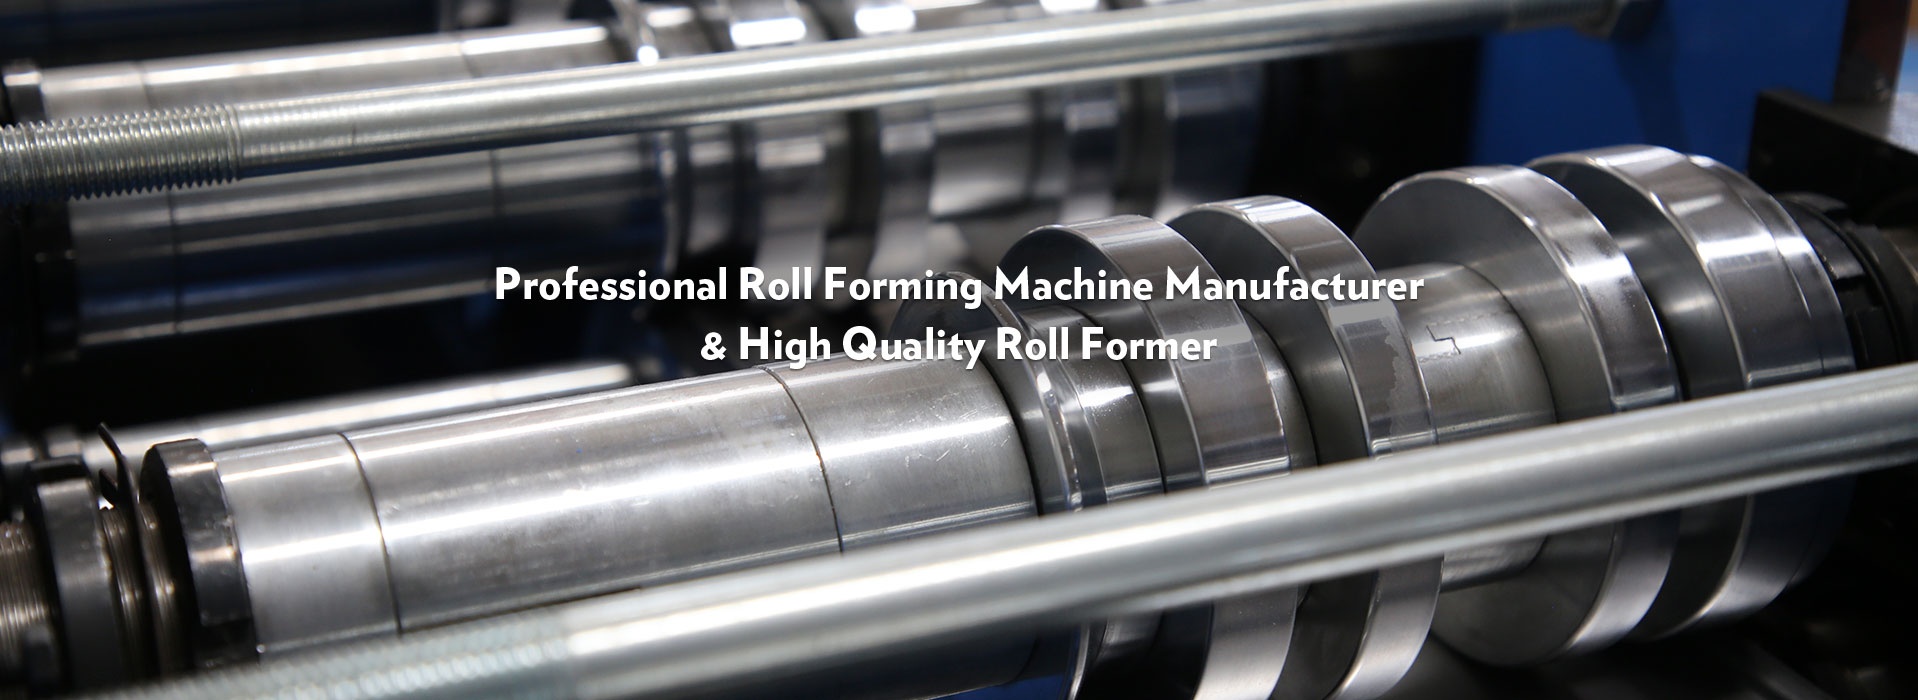 Professional Roll Forming Machine Manufacturer & High Quality Roll Former